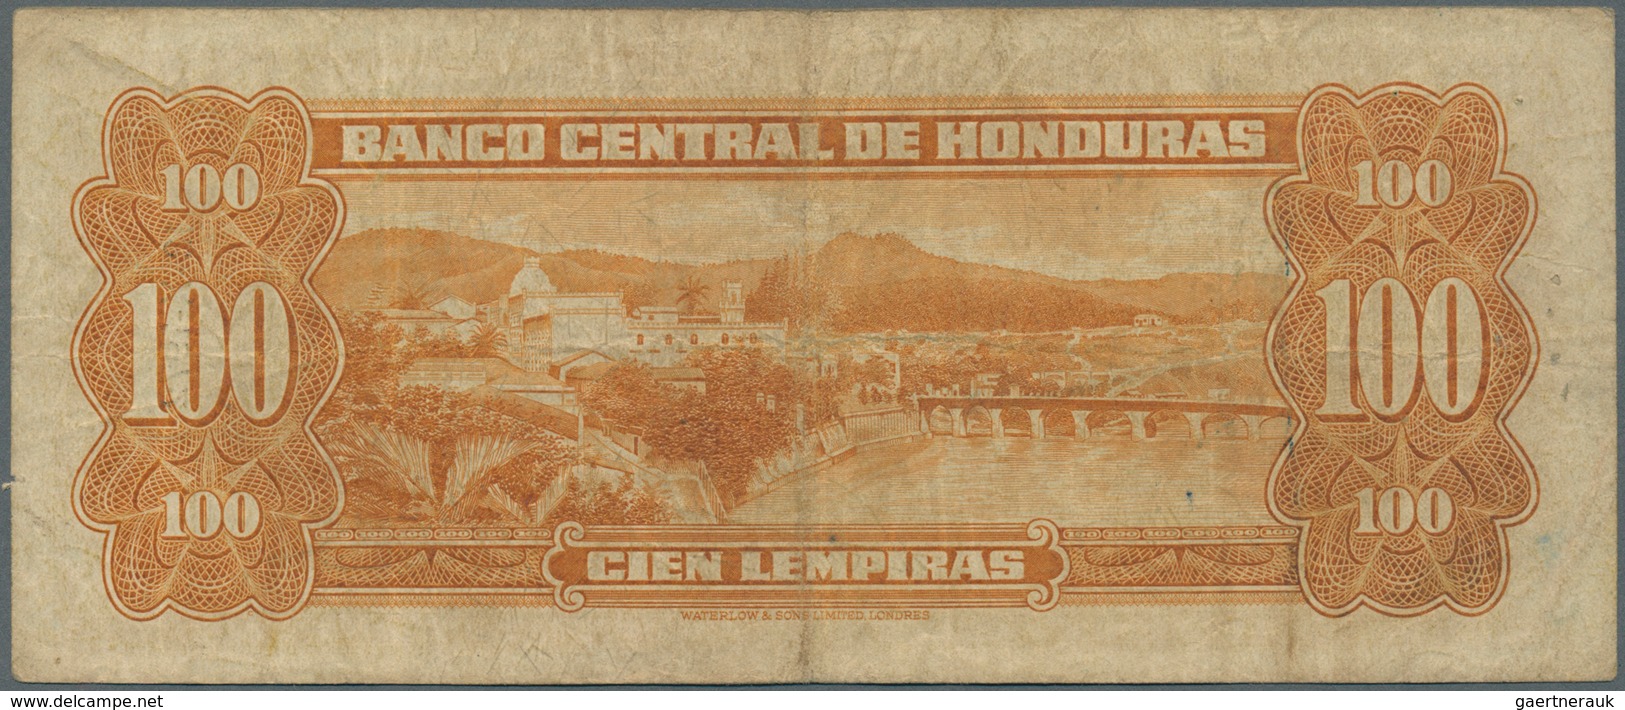 01670 Honduras: 100 Lempiras 1972 P. 49d, Used With Folds And Creases, Stained Paper, 2 Pinholes, But No T - Honduras